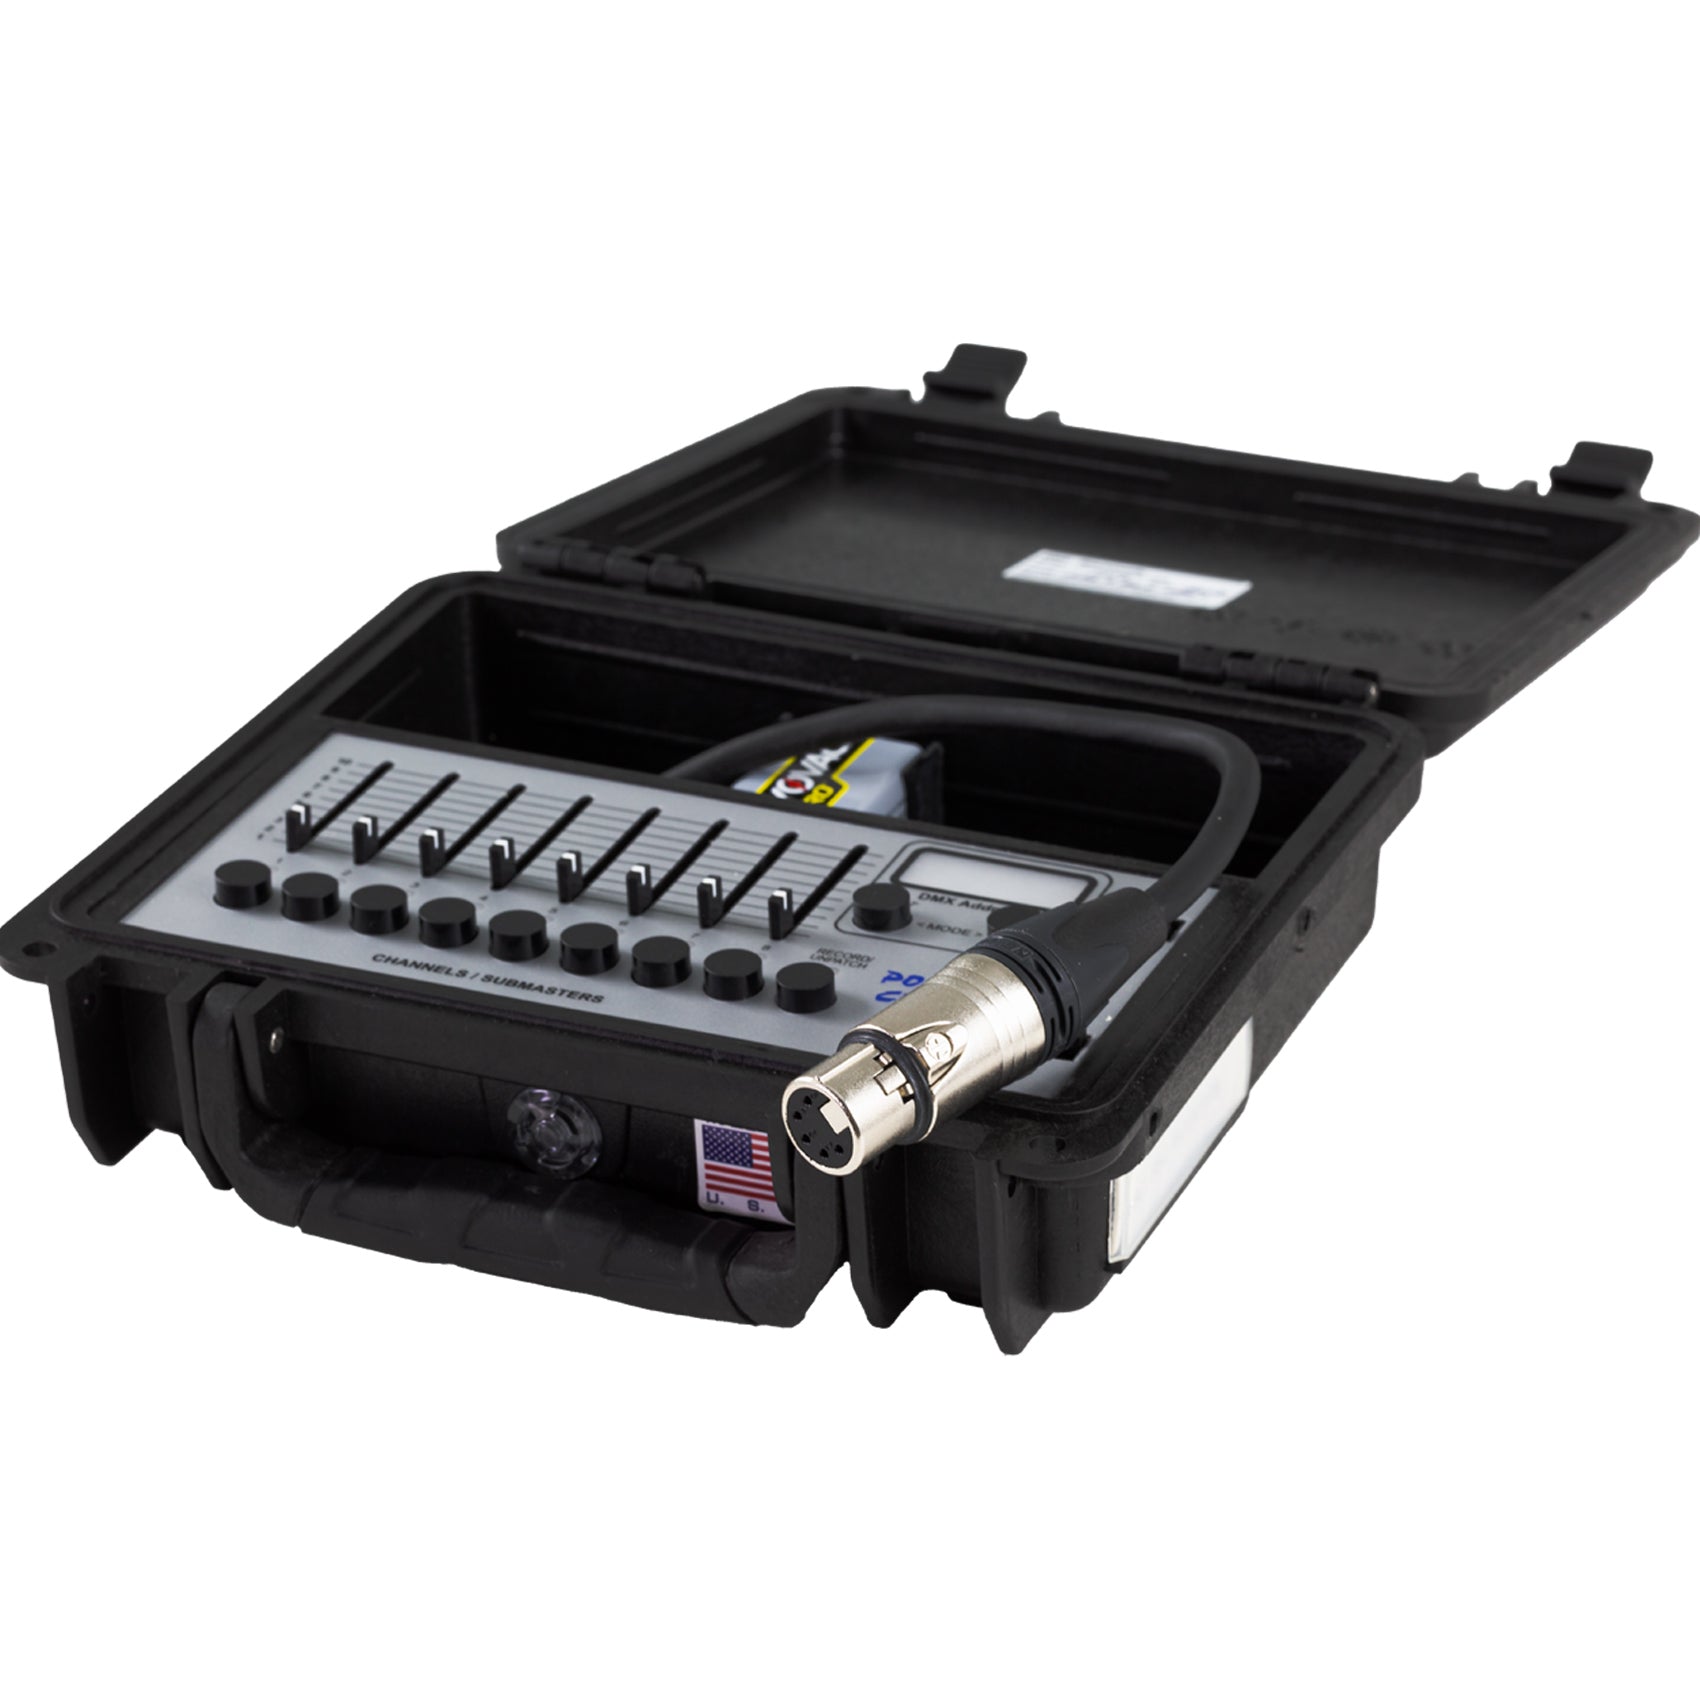 Pocket Console DMX with dmXact by Baxter Controls